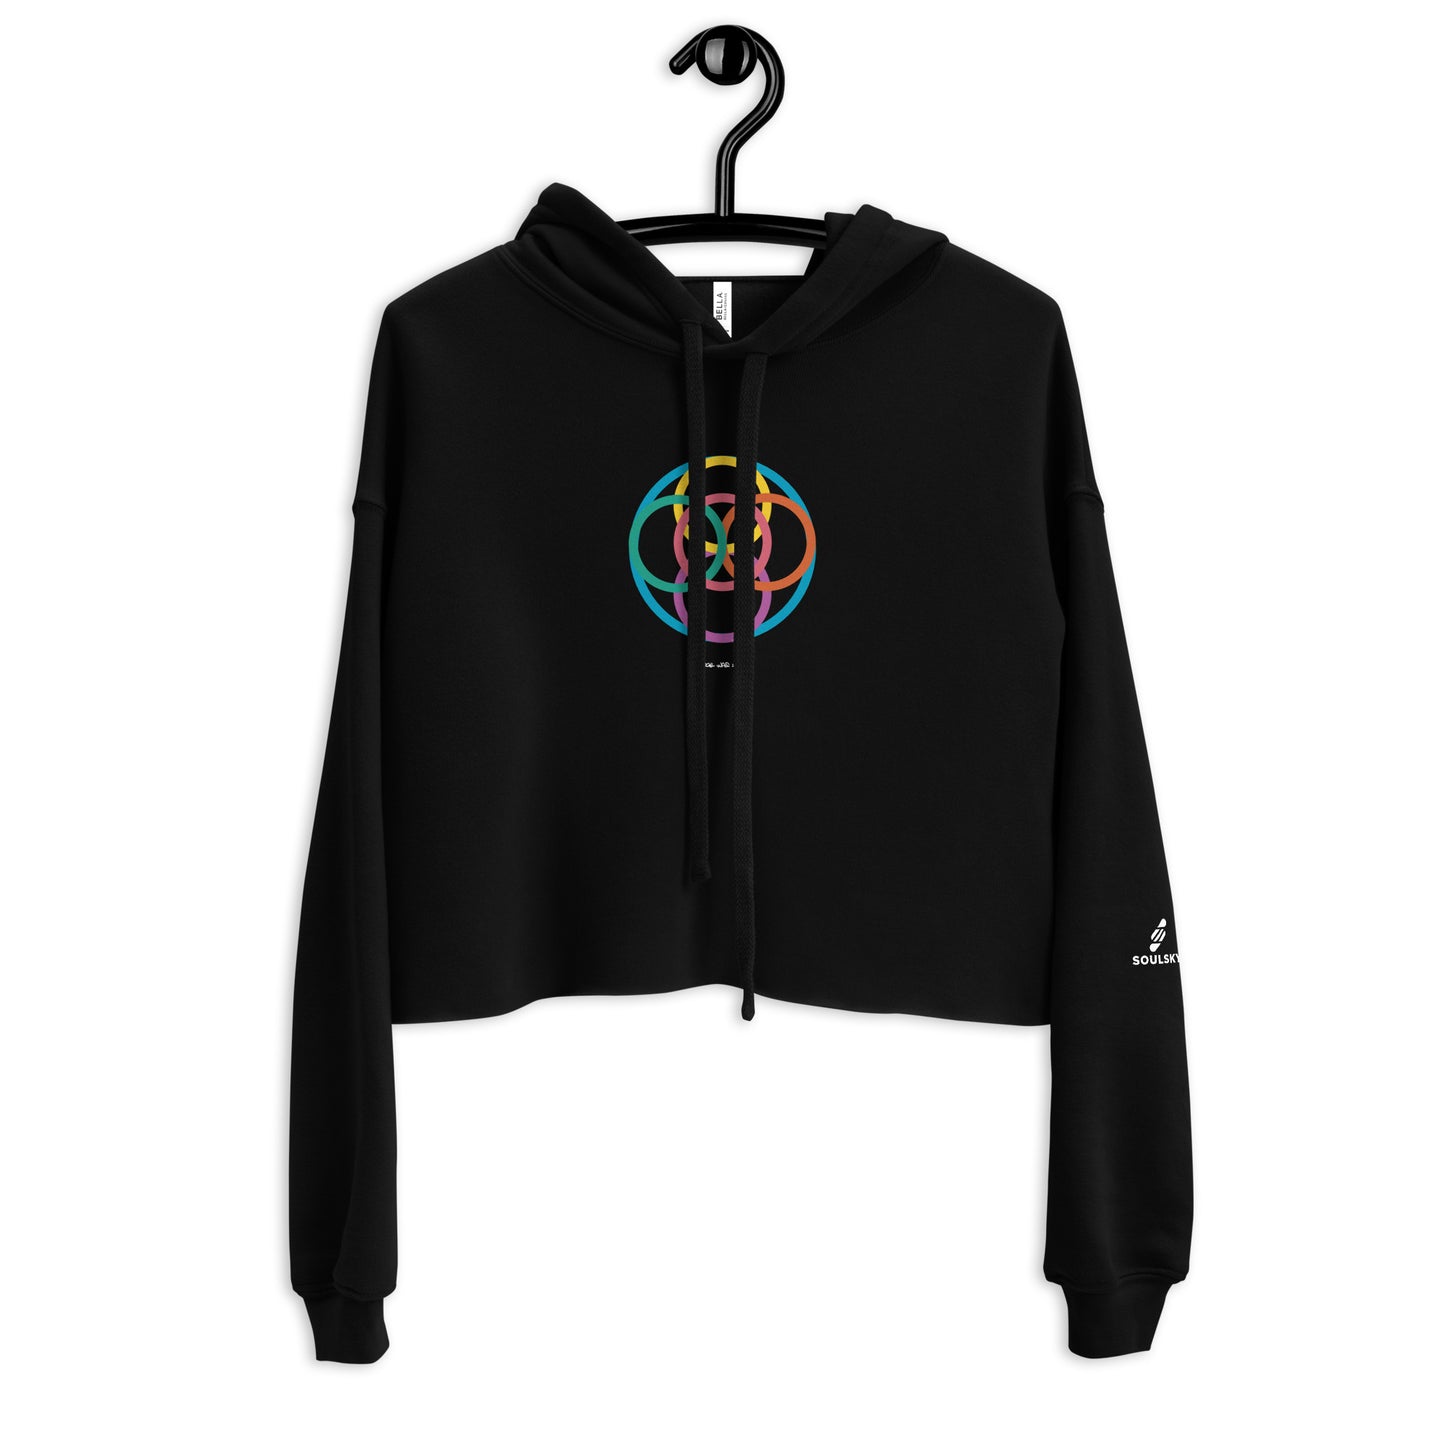 CONNECTED Cropped Hoodie